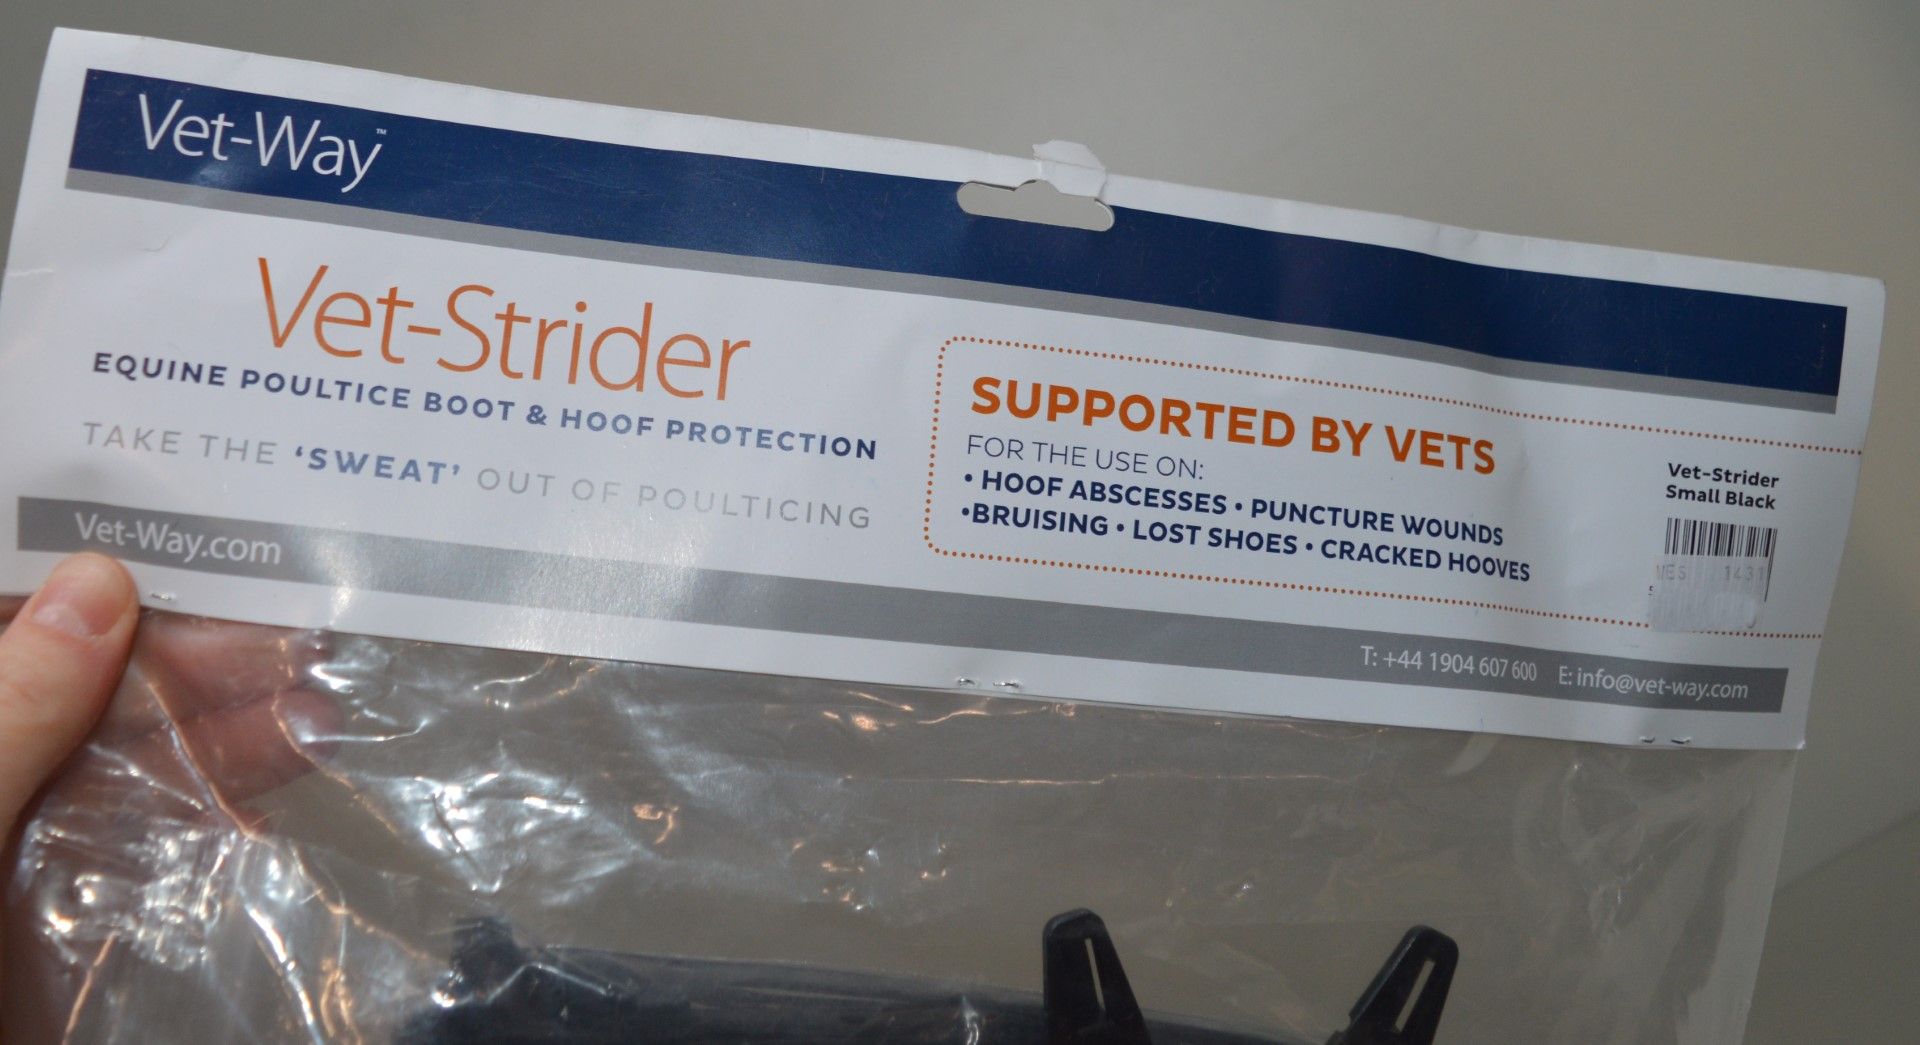 1 x Vet-Strider Equine Poultice Boot and Hoof Protection - CL401 - Suitable For Use on Hoof - Image 2 of 4